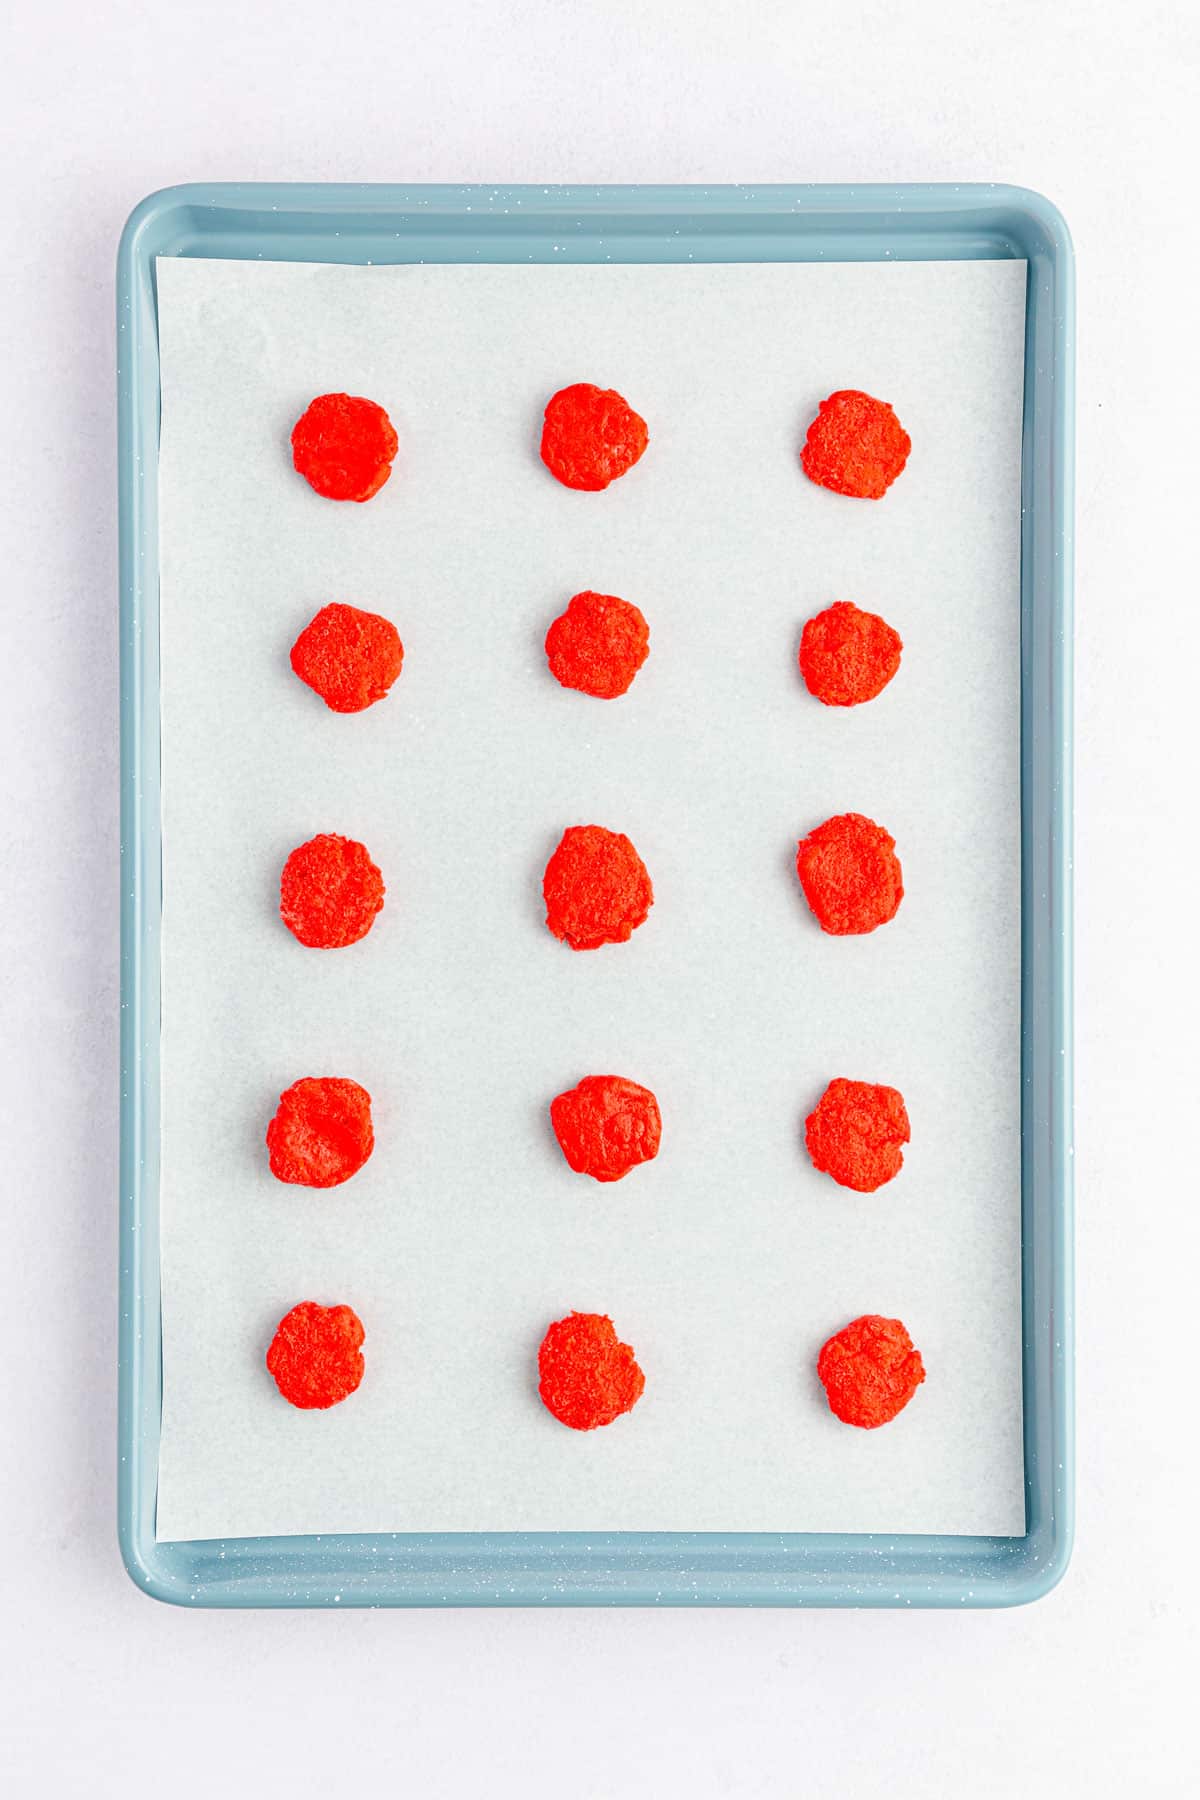 Discs of red cake ball dough on a baking tray, ready to be layered with other colors.